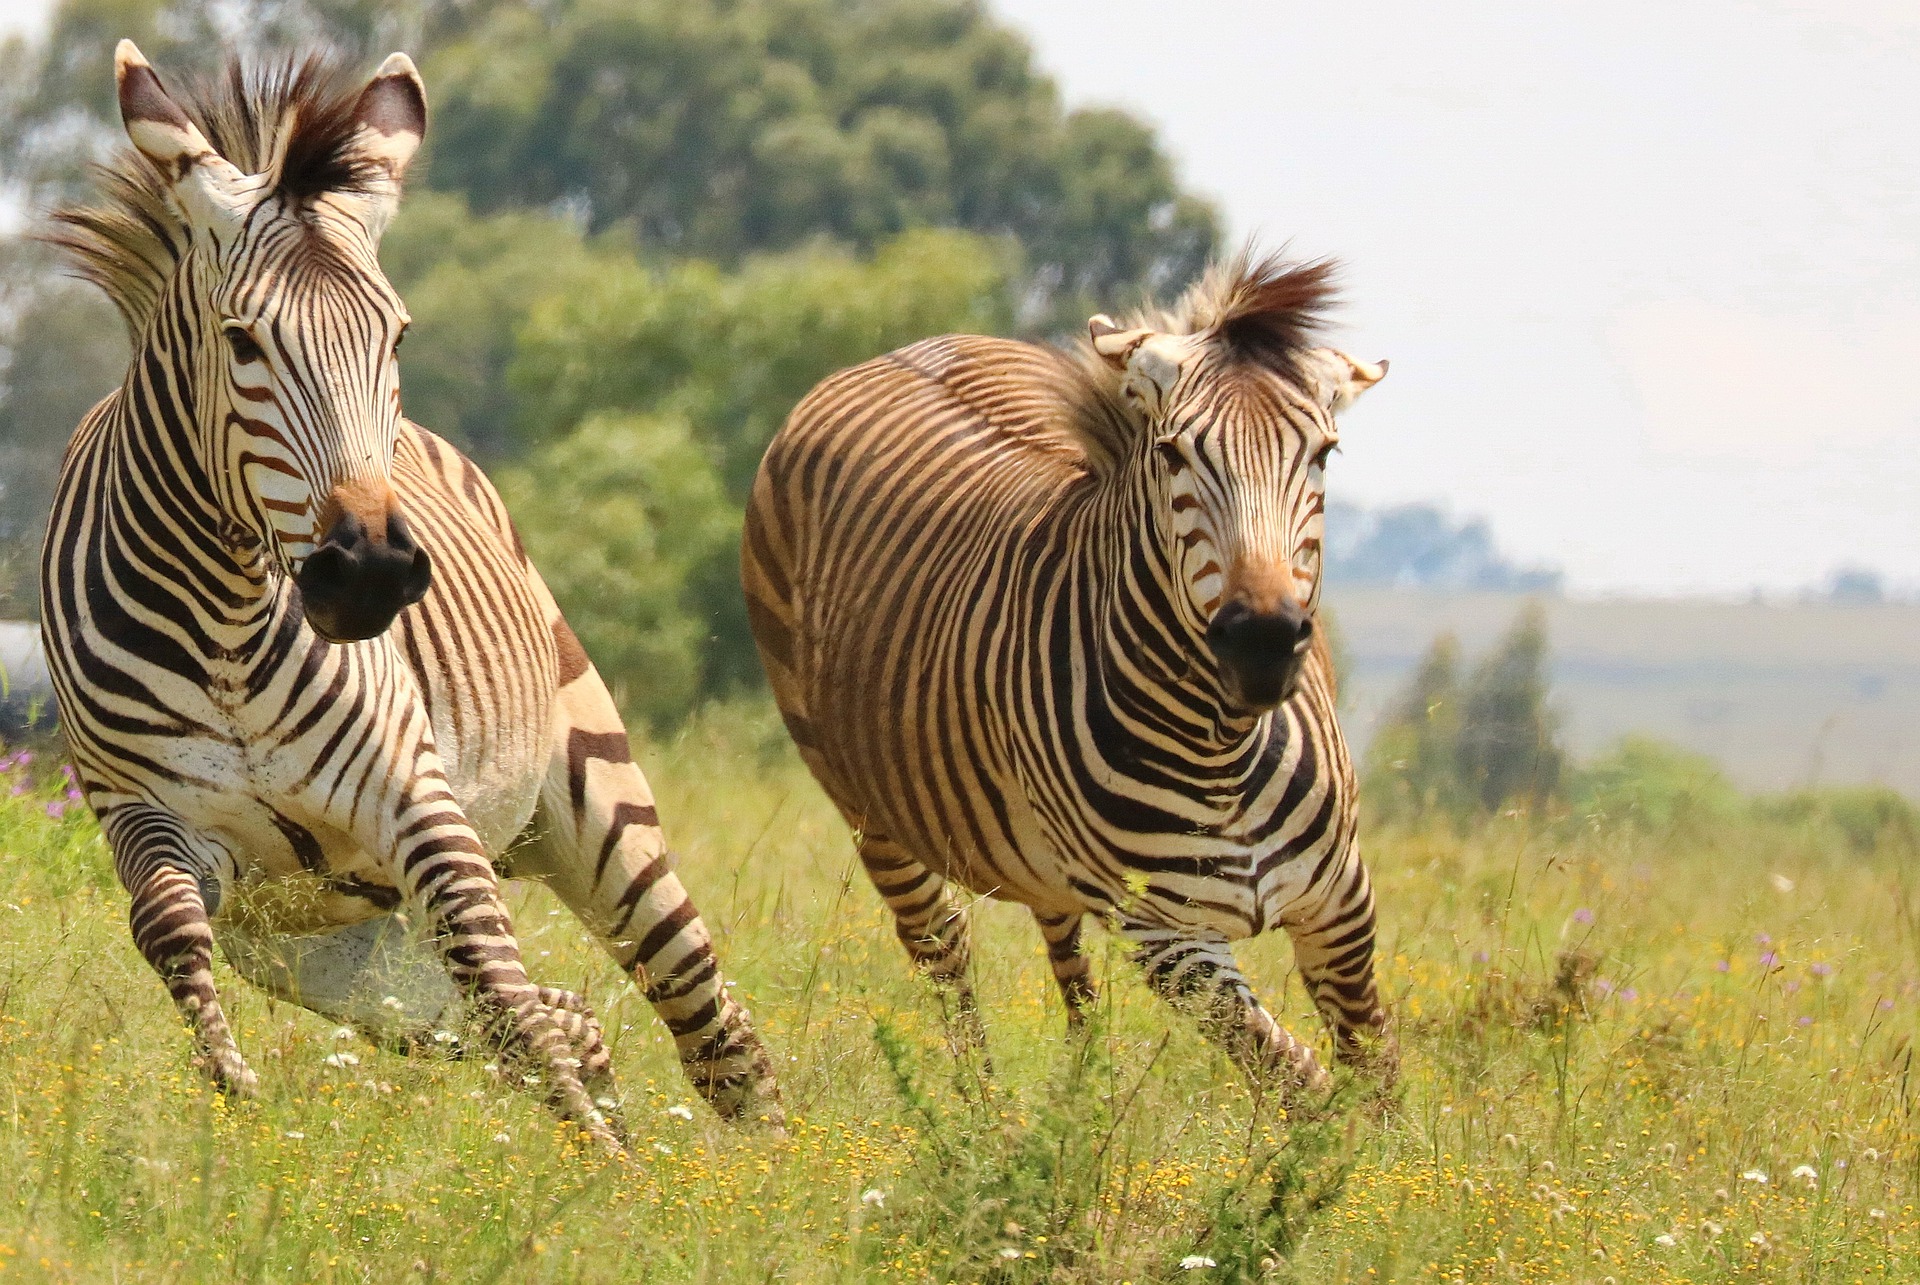 Maryland zebras are on the loose.